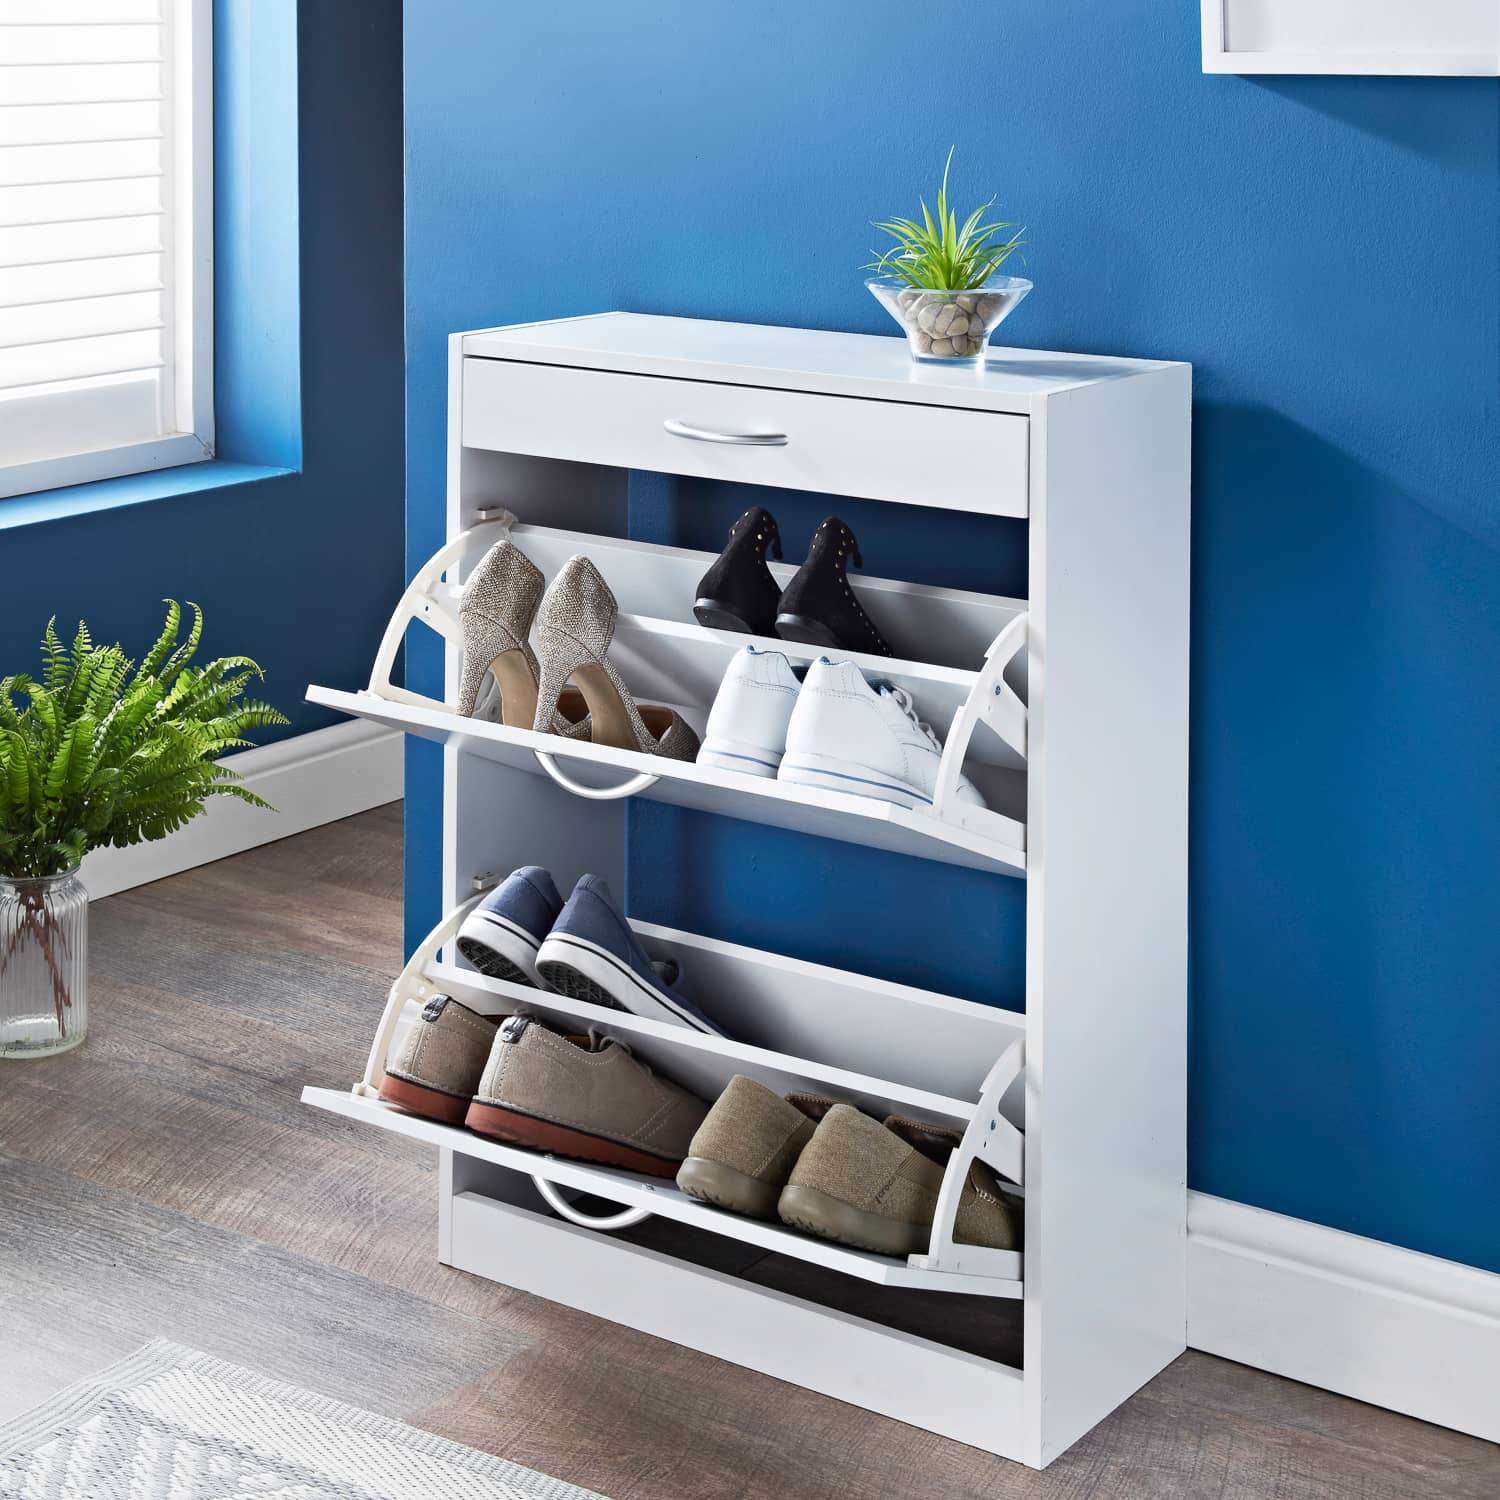 6 Reasons To Choose Shoe Cabinet In Cream Shades